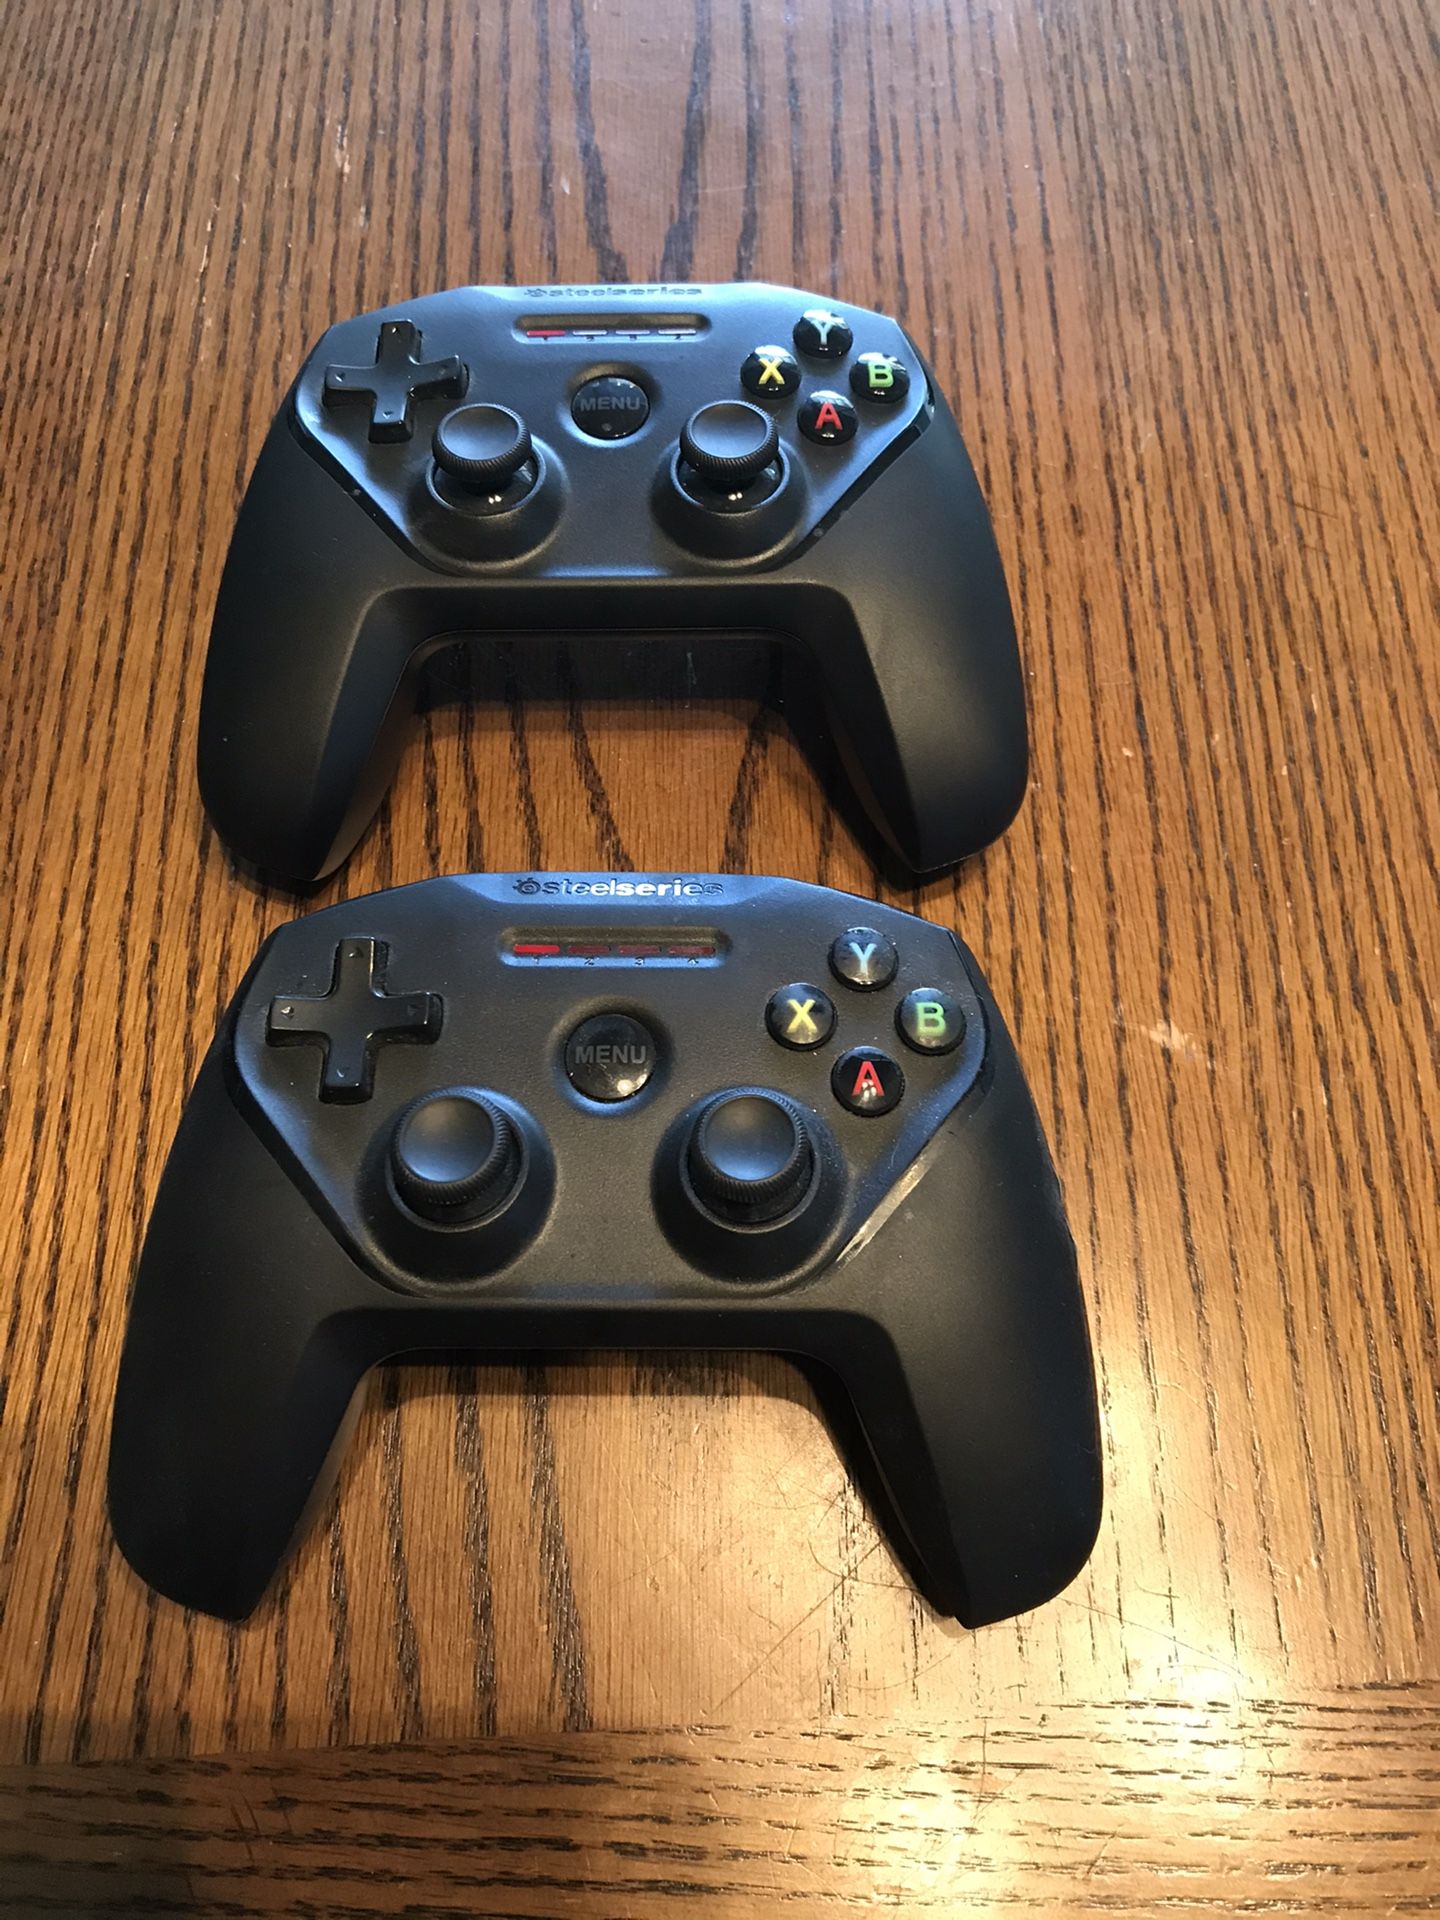 2 Steelseries Nimbus Controllers Apple TV, iPhone $20 apiece or both for $30